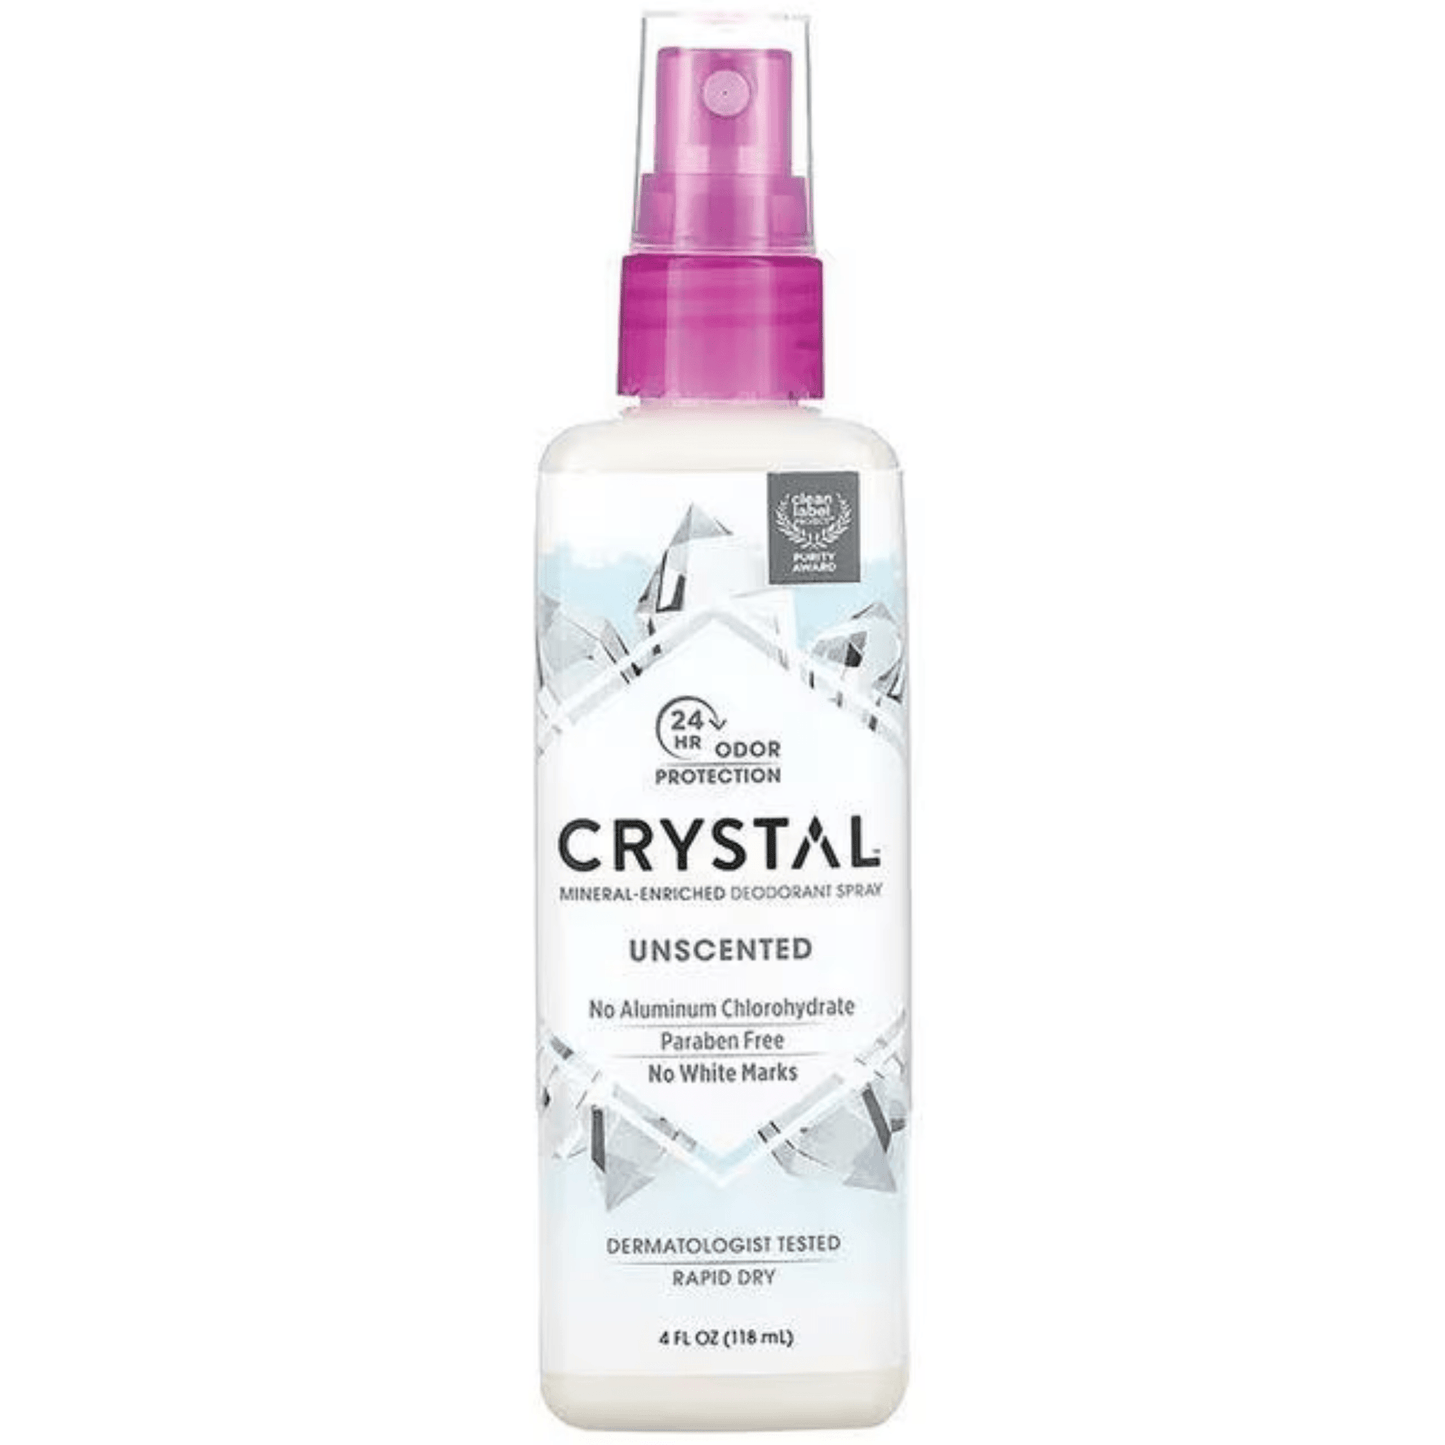 Primary Image of Crystal Body Spray